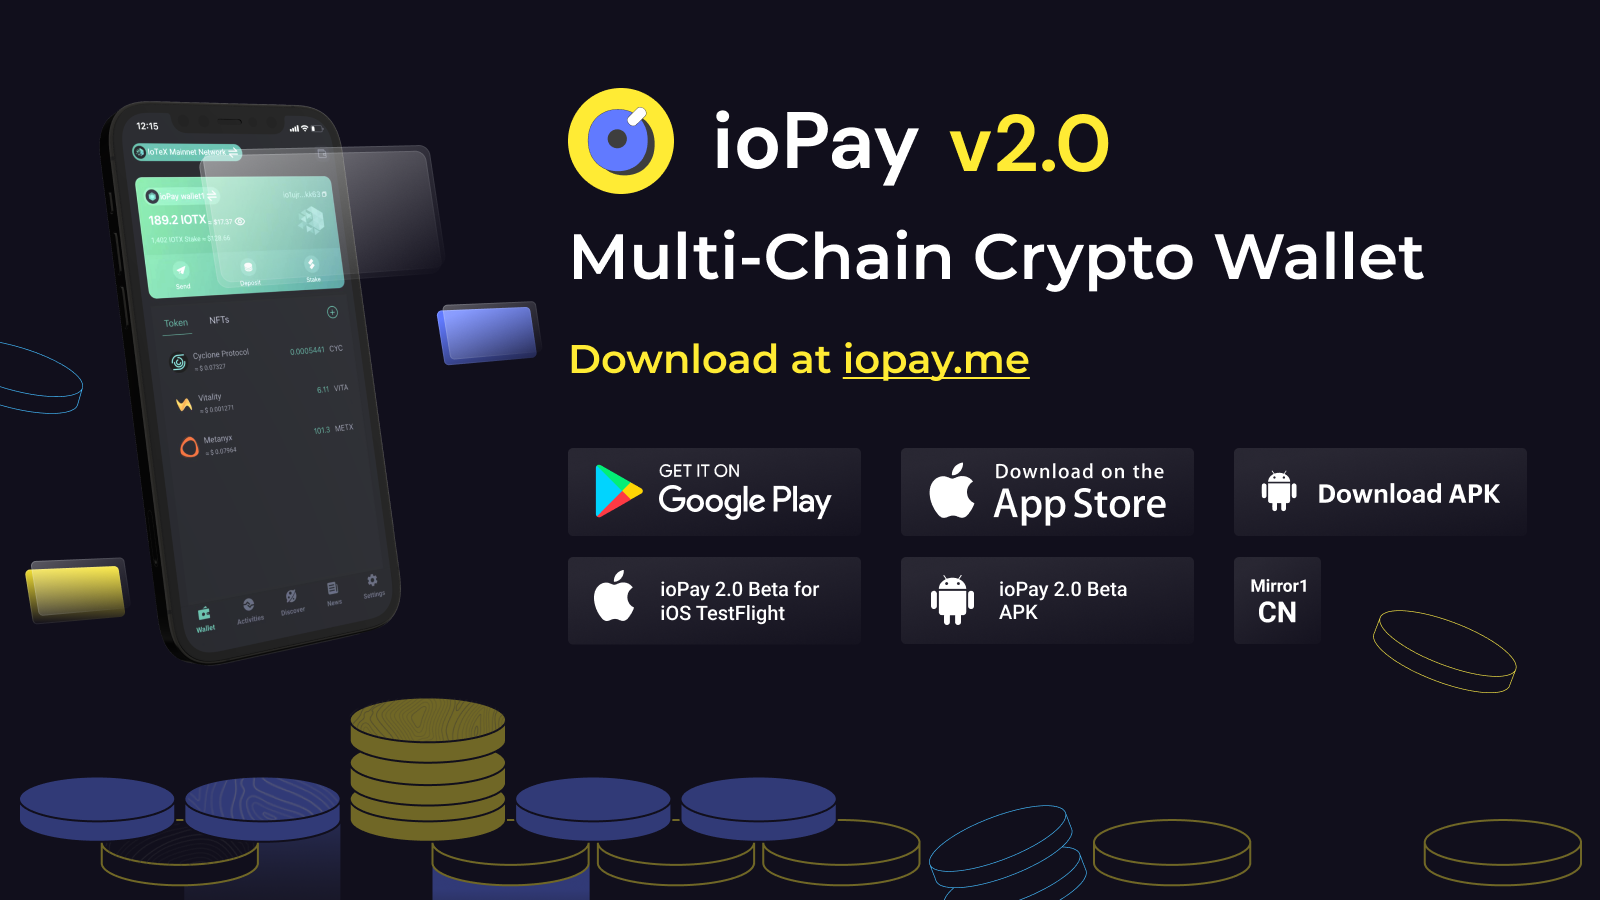 ioPay v2.0 with logos of GooglePlay, the App Store and "Download APK"